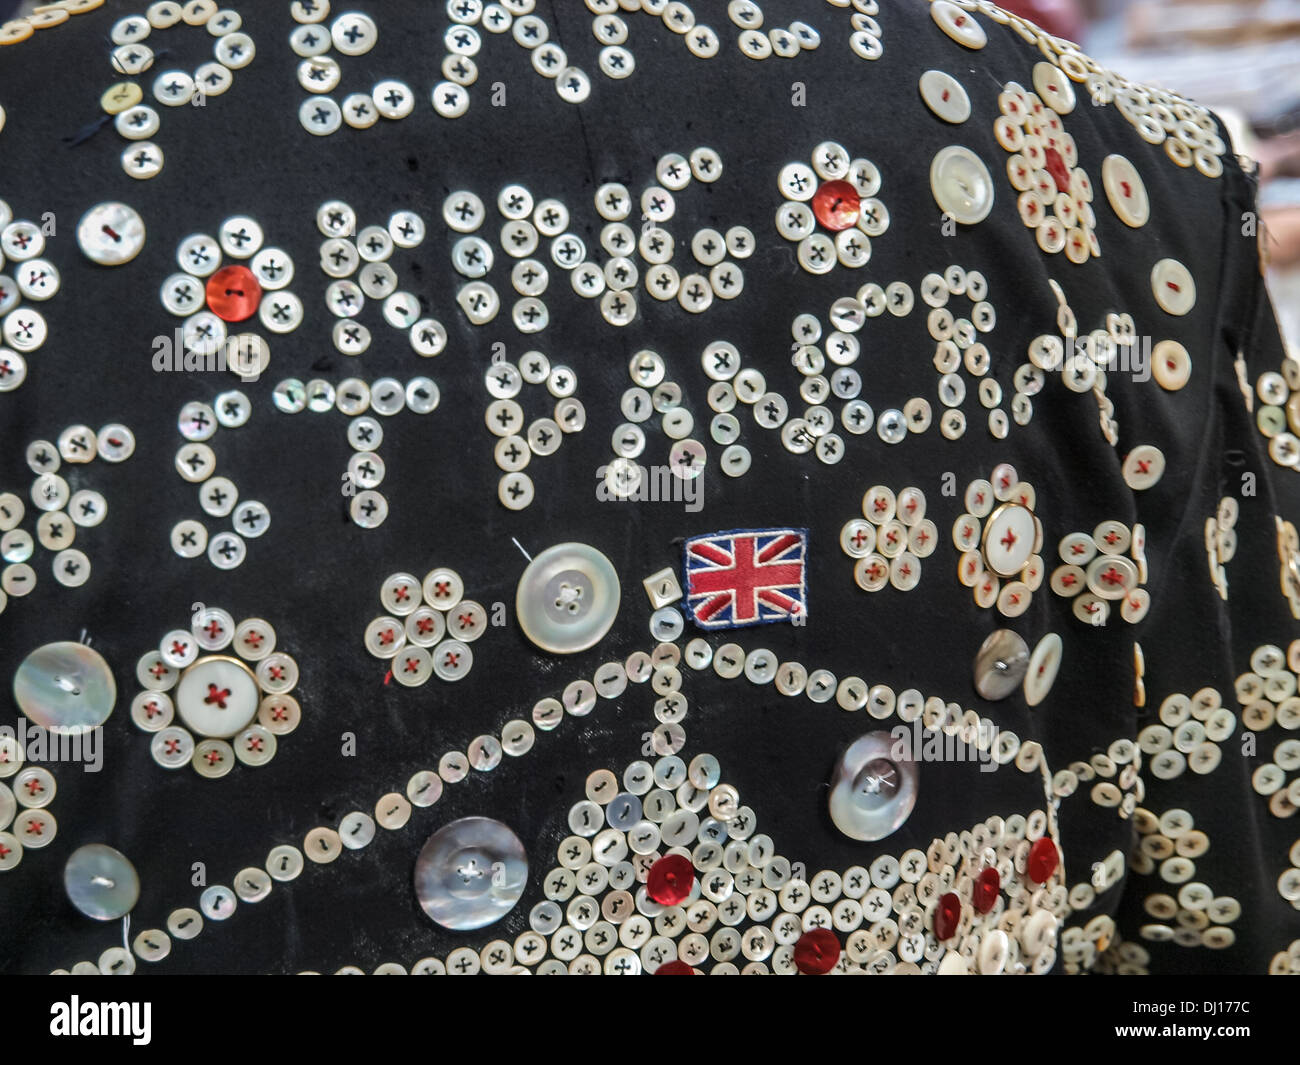 Traditional Pearly King and Pearly Queen in London. Stock Photo